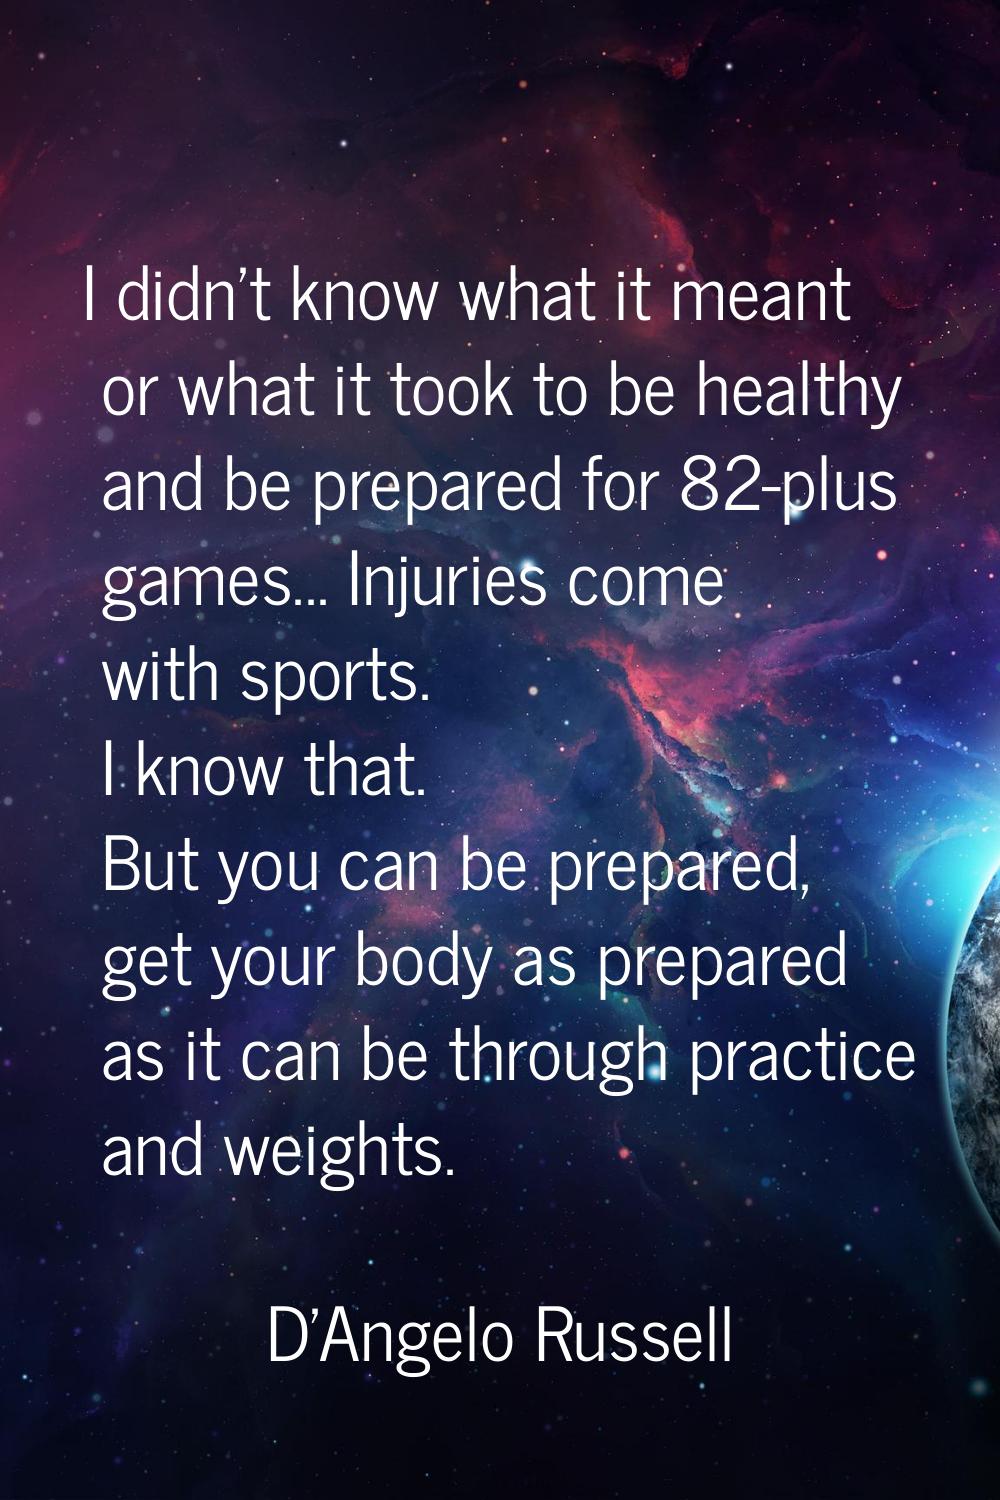 I didn't know what it meant or what it took to be healthy and be prepared for 82-plus games... Inju